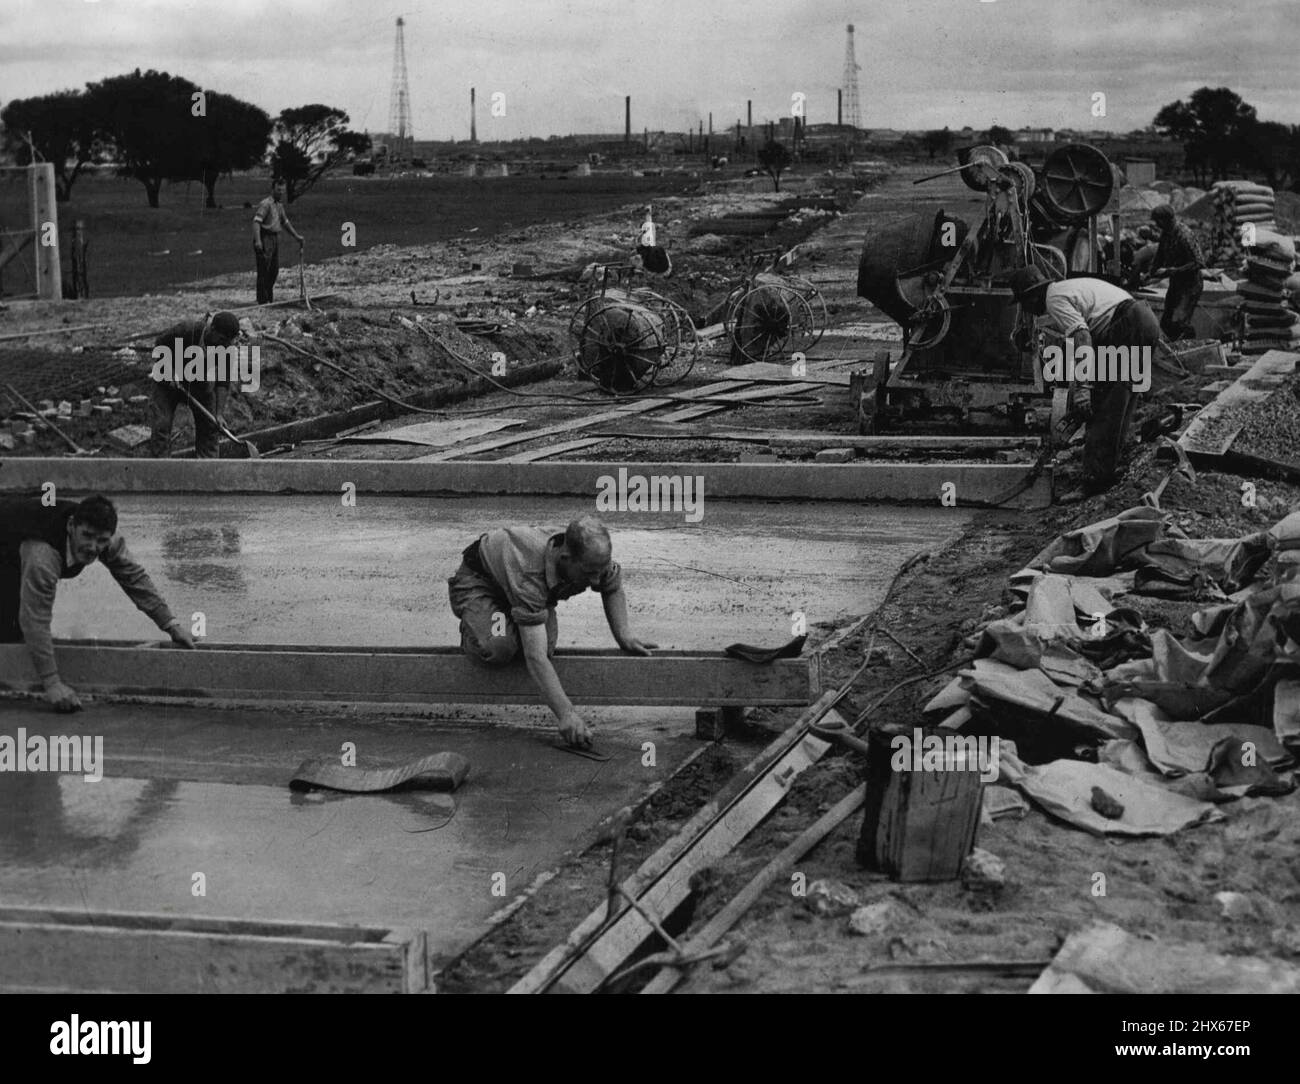 Soon To Start Production - Production at the new Commonwealth Aircraft Corporation factory at Fisherman's Bend, Melbourne, will soon start. To make easier access to the factory, a concrete road a mile long, is being laid down. Men are shown at work on the road. September 14, 1937. Stock Photo